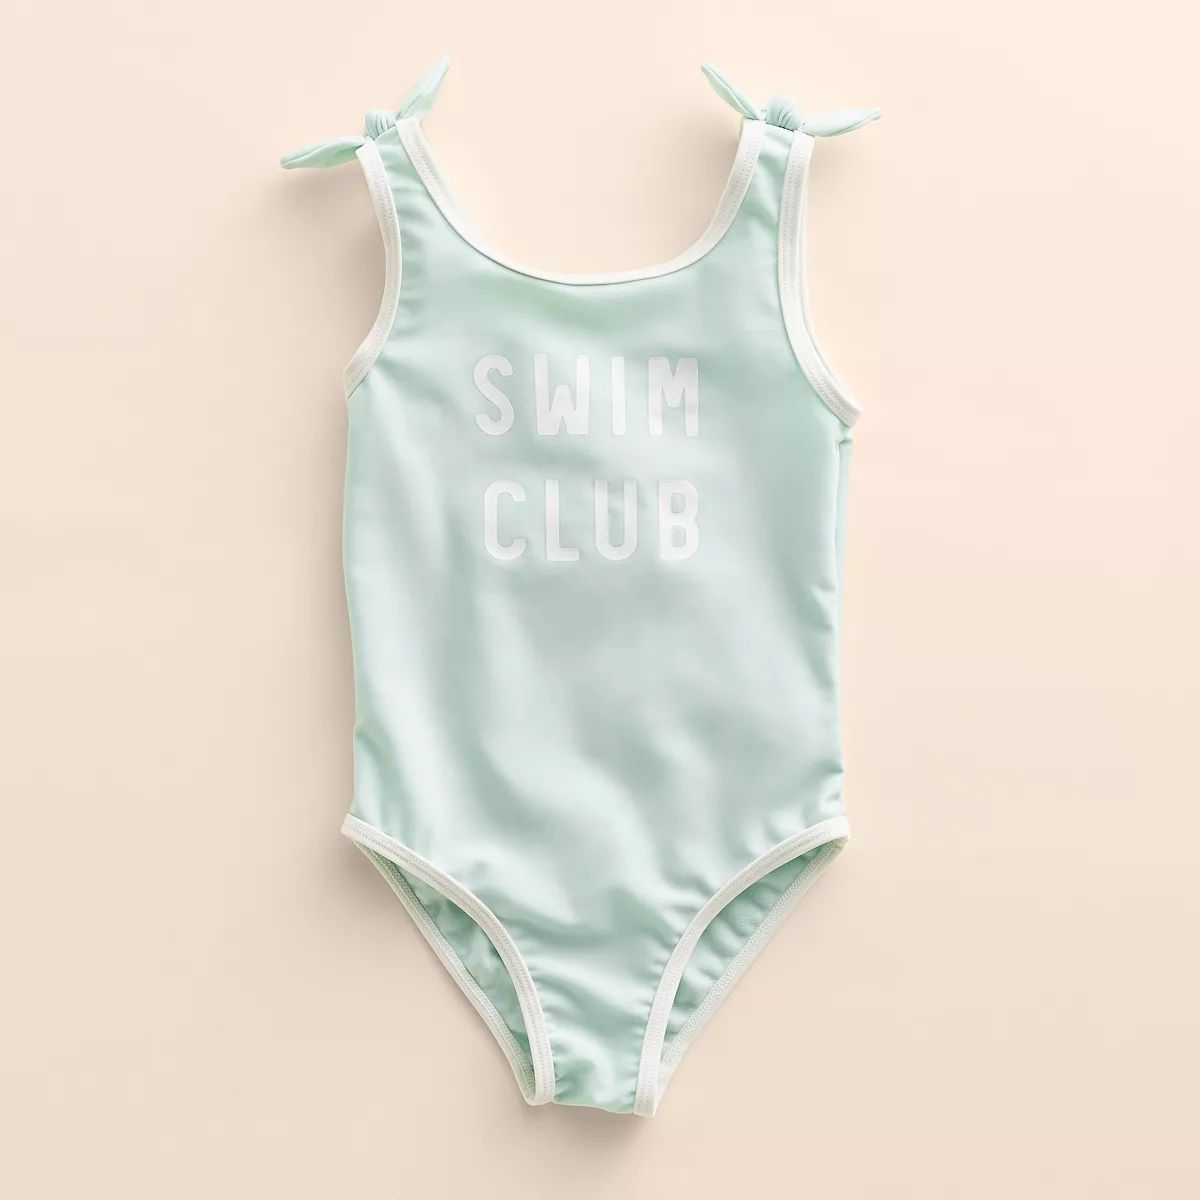 Baby & Toddler Little Co. by Lauren Conrad One-Piece Swimsuit | Kohl's